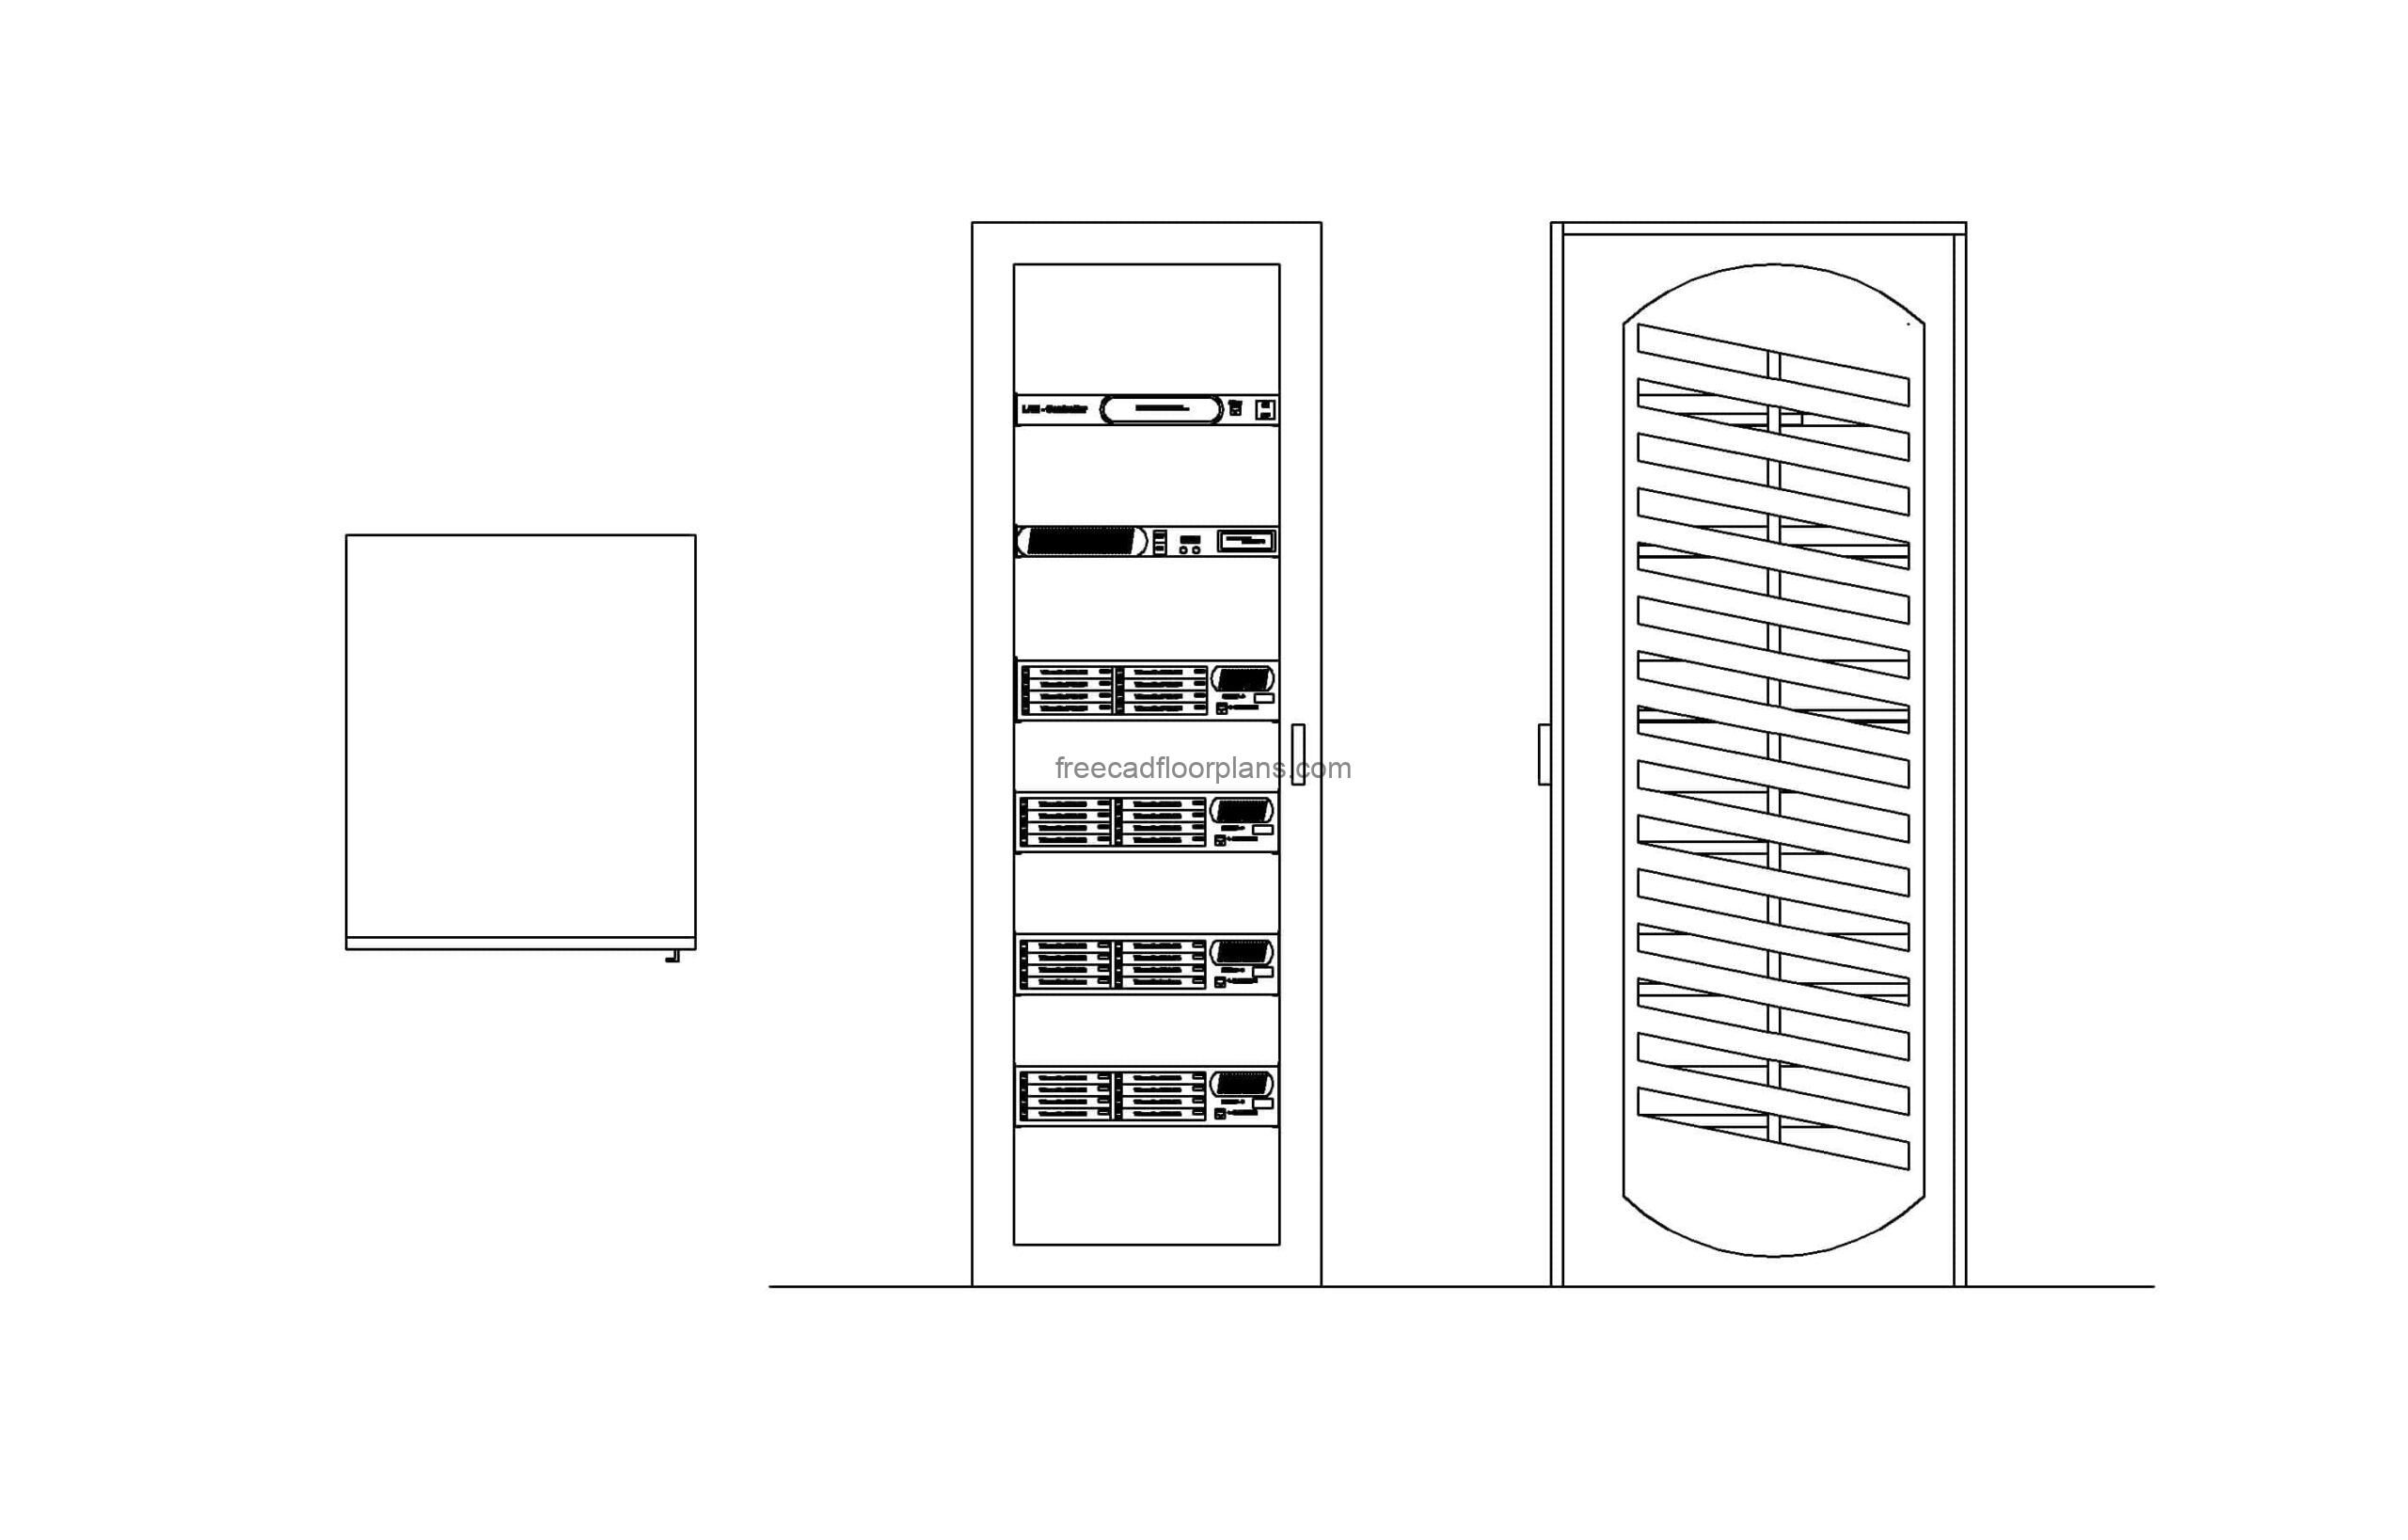 autocad block drawing of a server rack 2d plan and elevation views, dwg file download for free